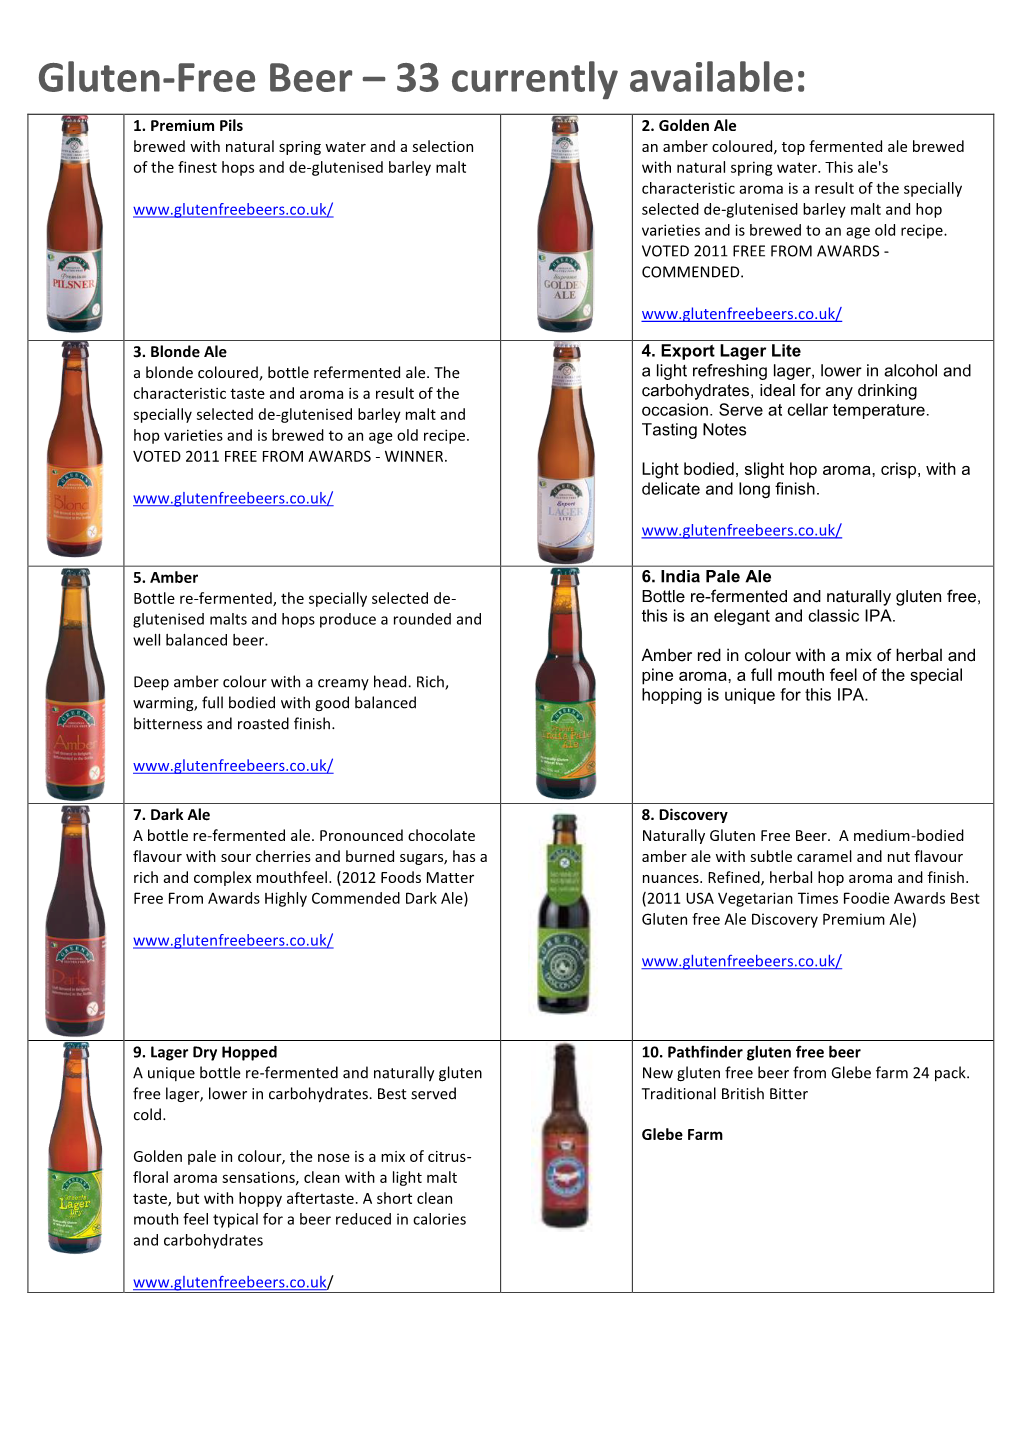 Gluten-Free Beer – 33 Currently Available: 1